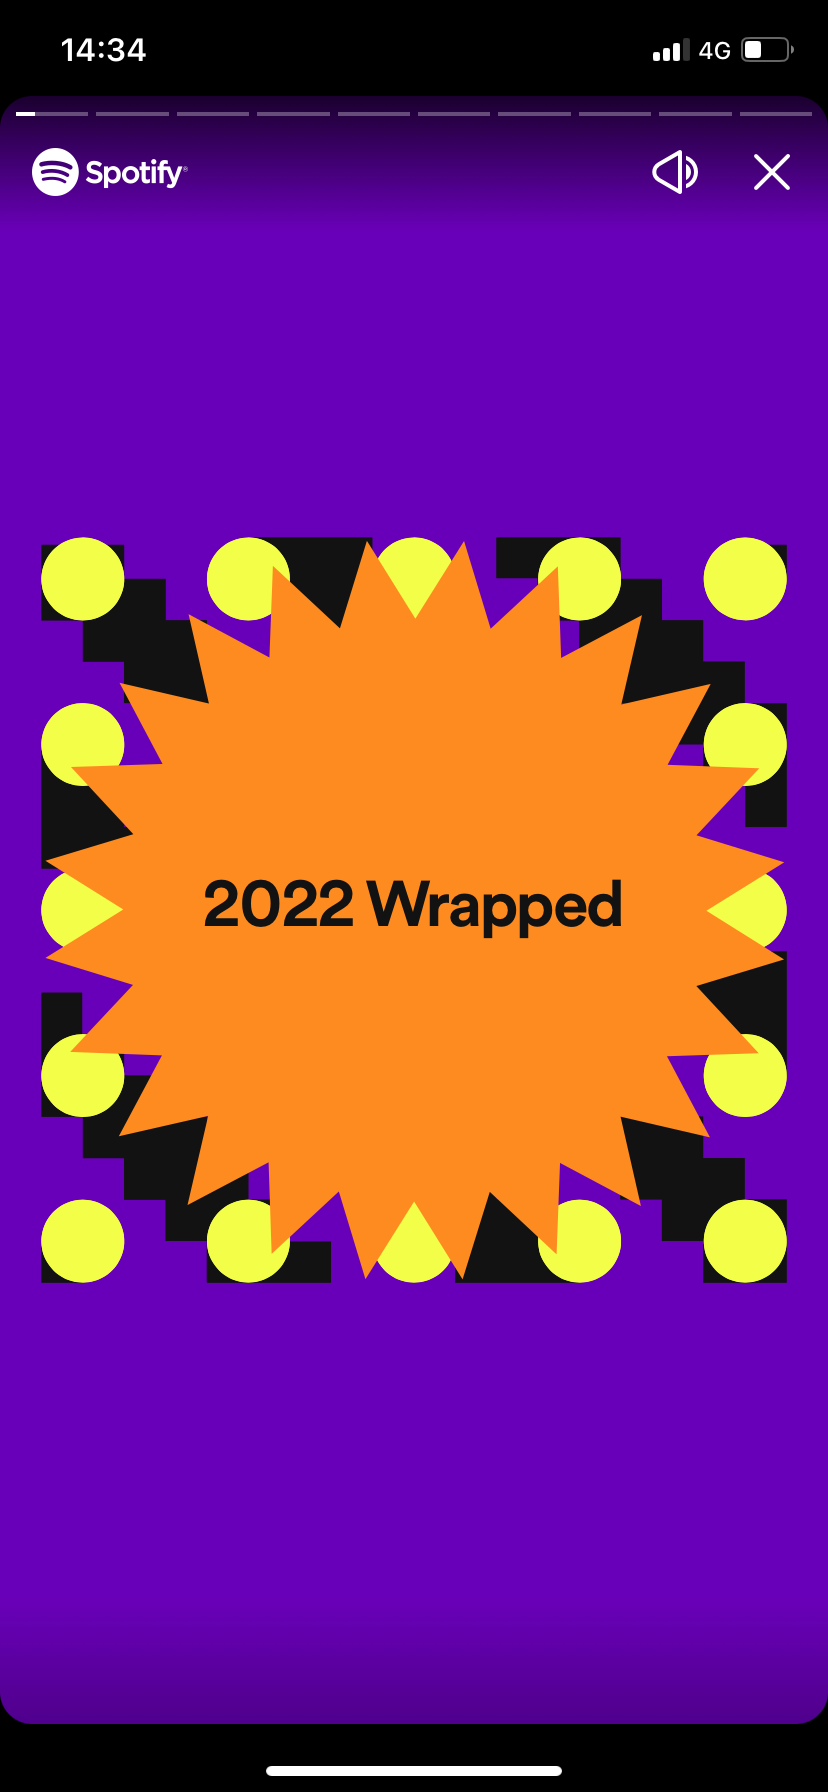 How to get your Spotify Wrapped 2022 3